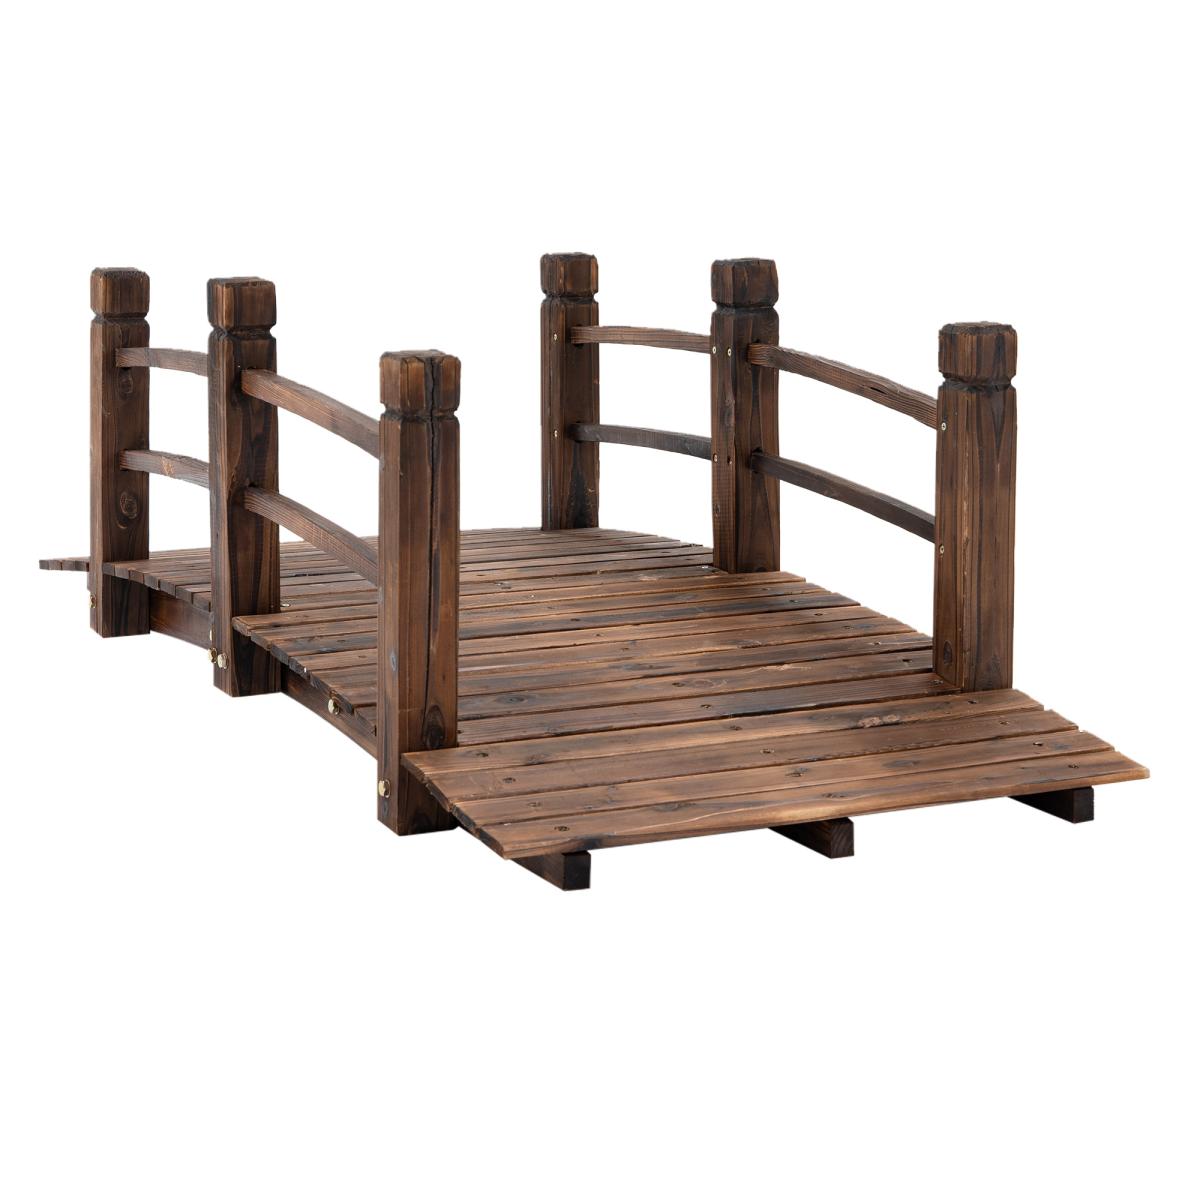 Fir Wood Garden Bridge Arc Walkway with Side Railings for Backyards, Gardens, and Streams, Stained Wood, 60